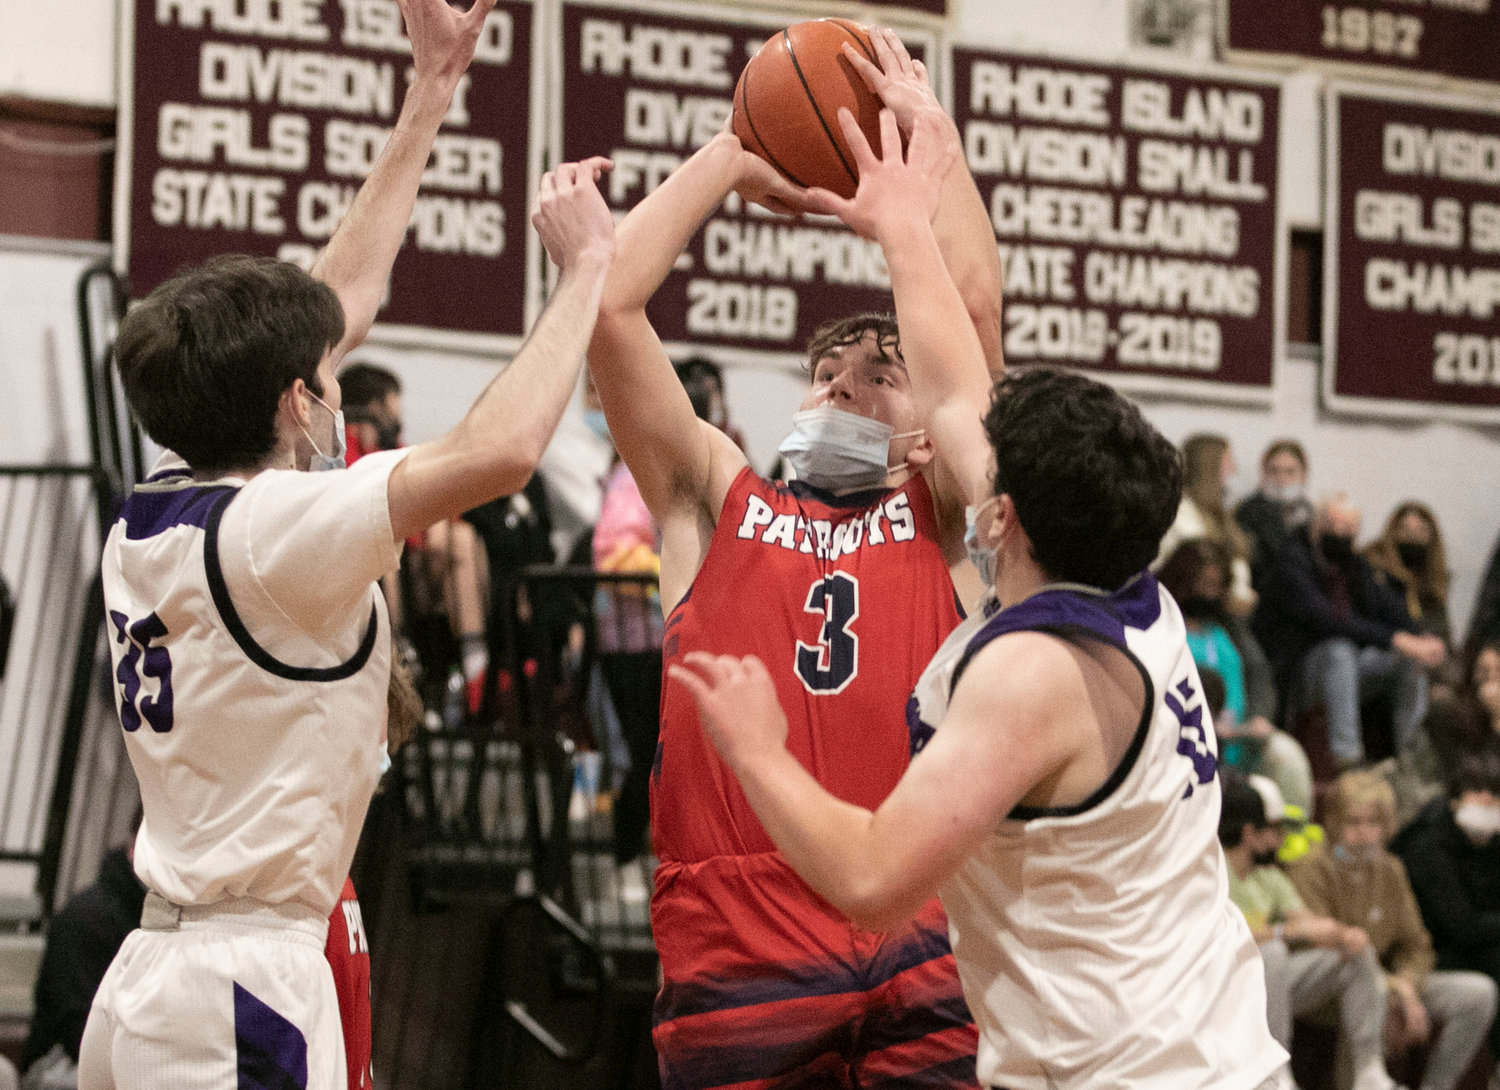 Jack Downing drives to the hoop as he’s pressured by Mt. Hope’s defense. He ended up with 16 points.